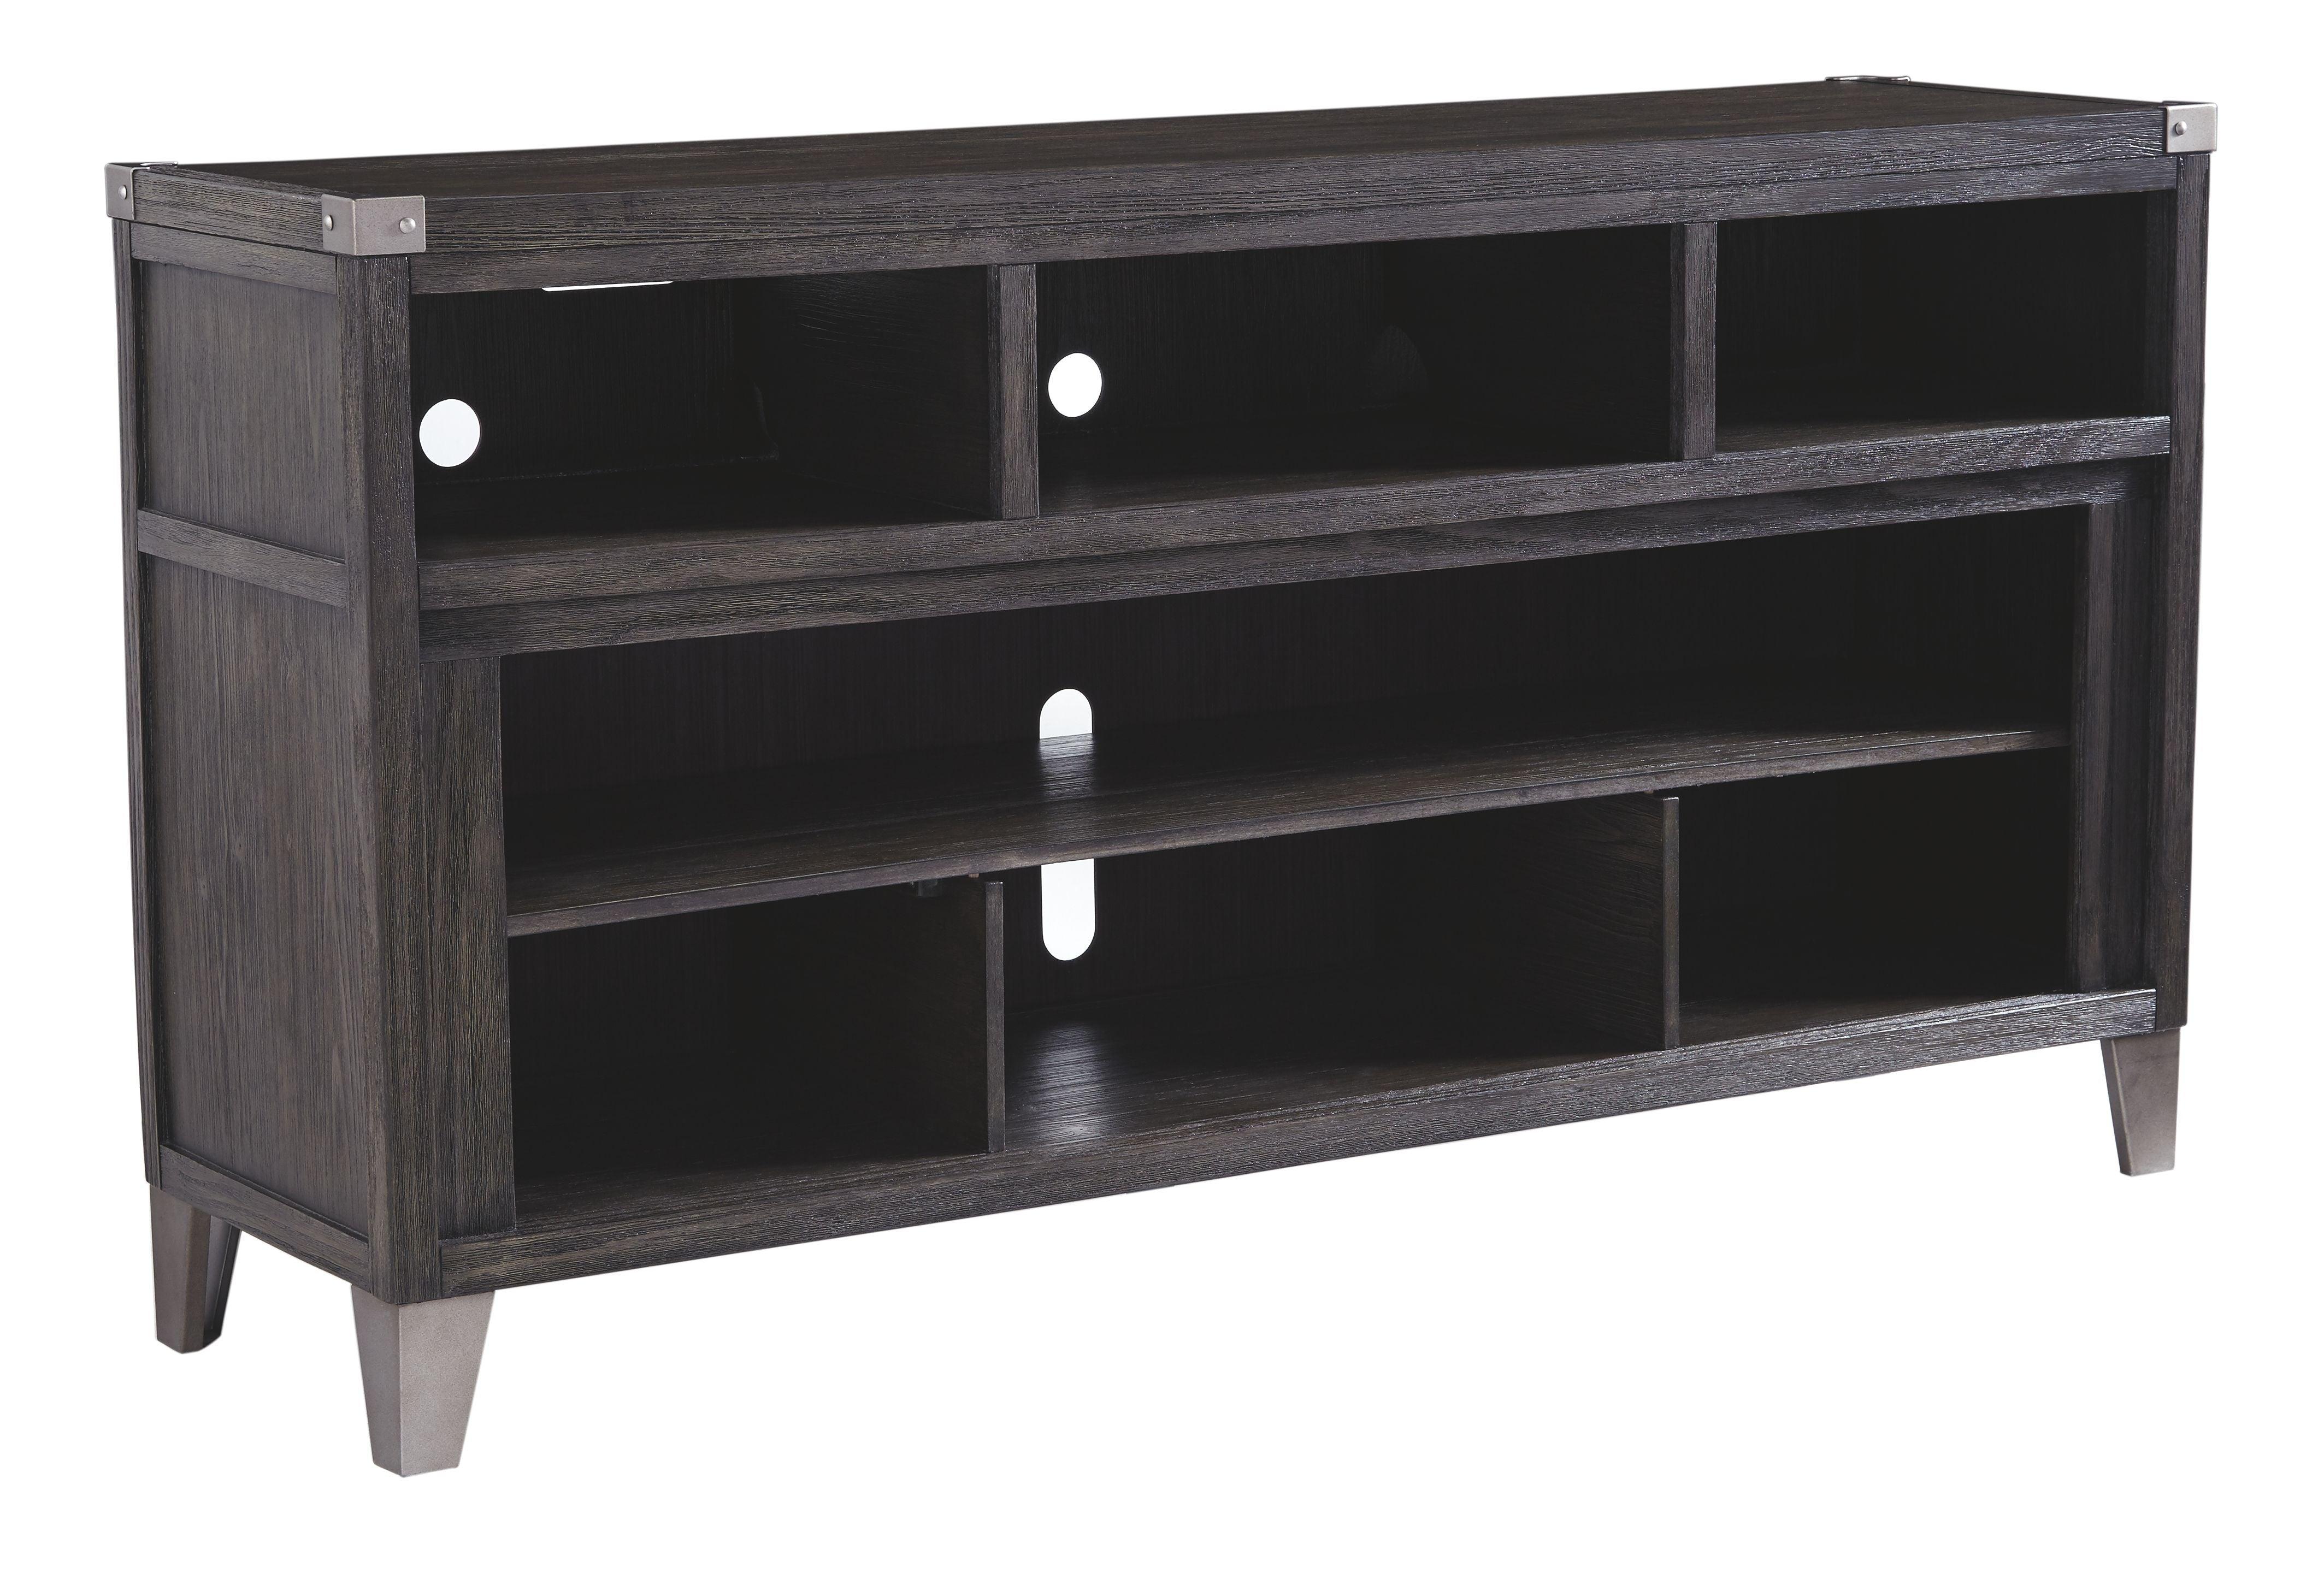 Ashley Furniture - Todoe - Gray - LG TV Stand W/Fireplace Option - 5th Avenue Furniture